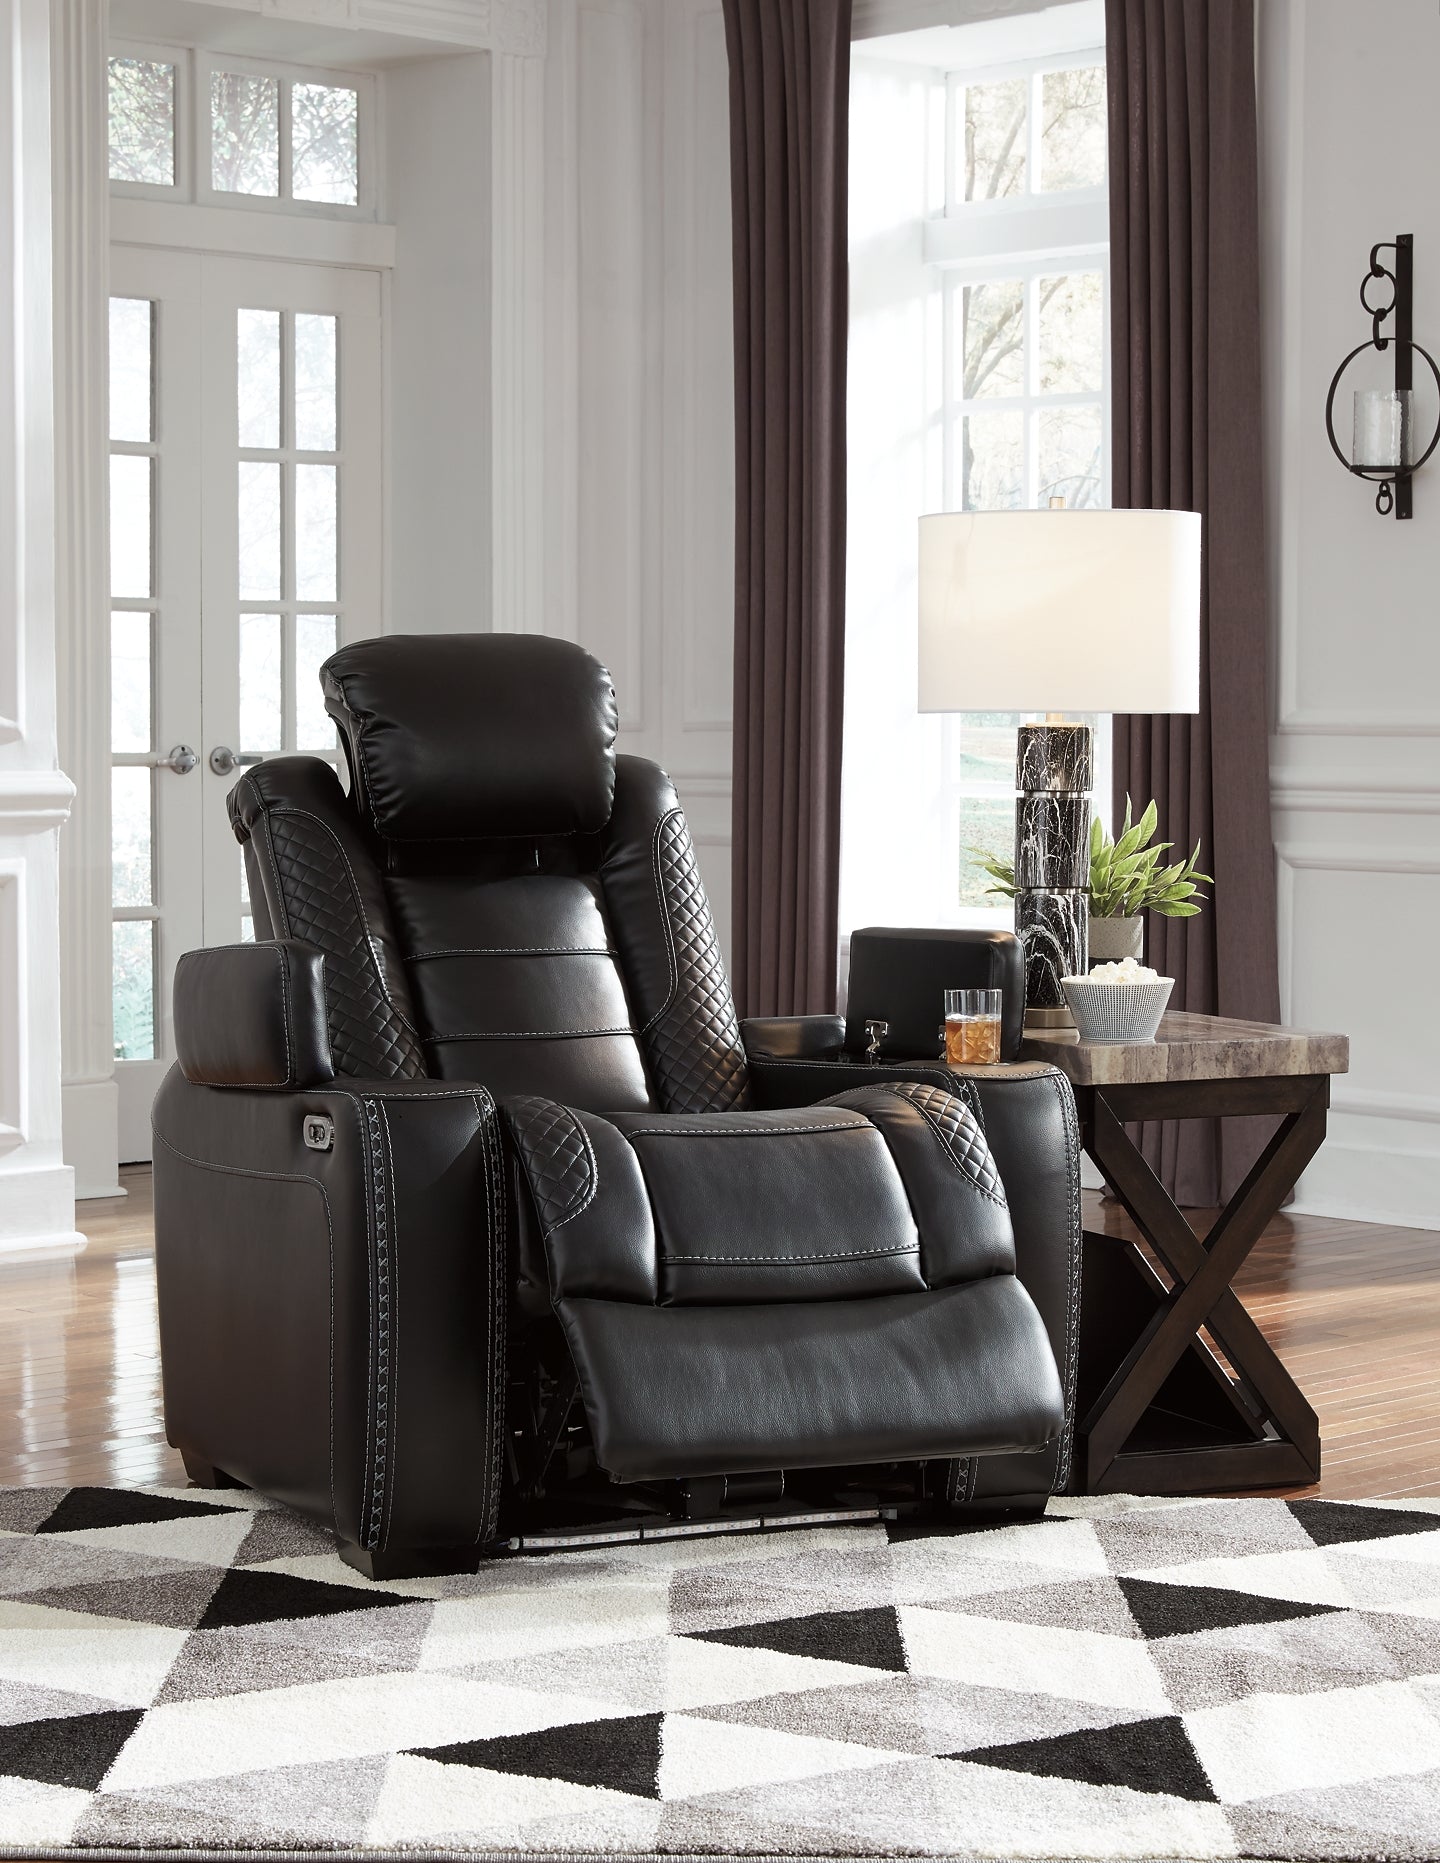 Party Time PWR Recliner/ADJ Headrest Rent Wise Rent To Own Jacksonville, Florida